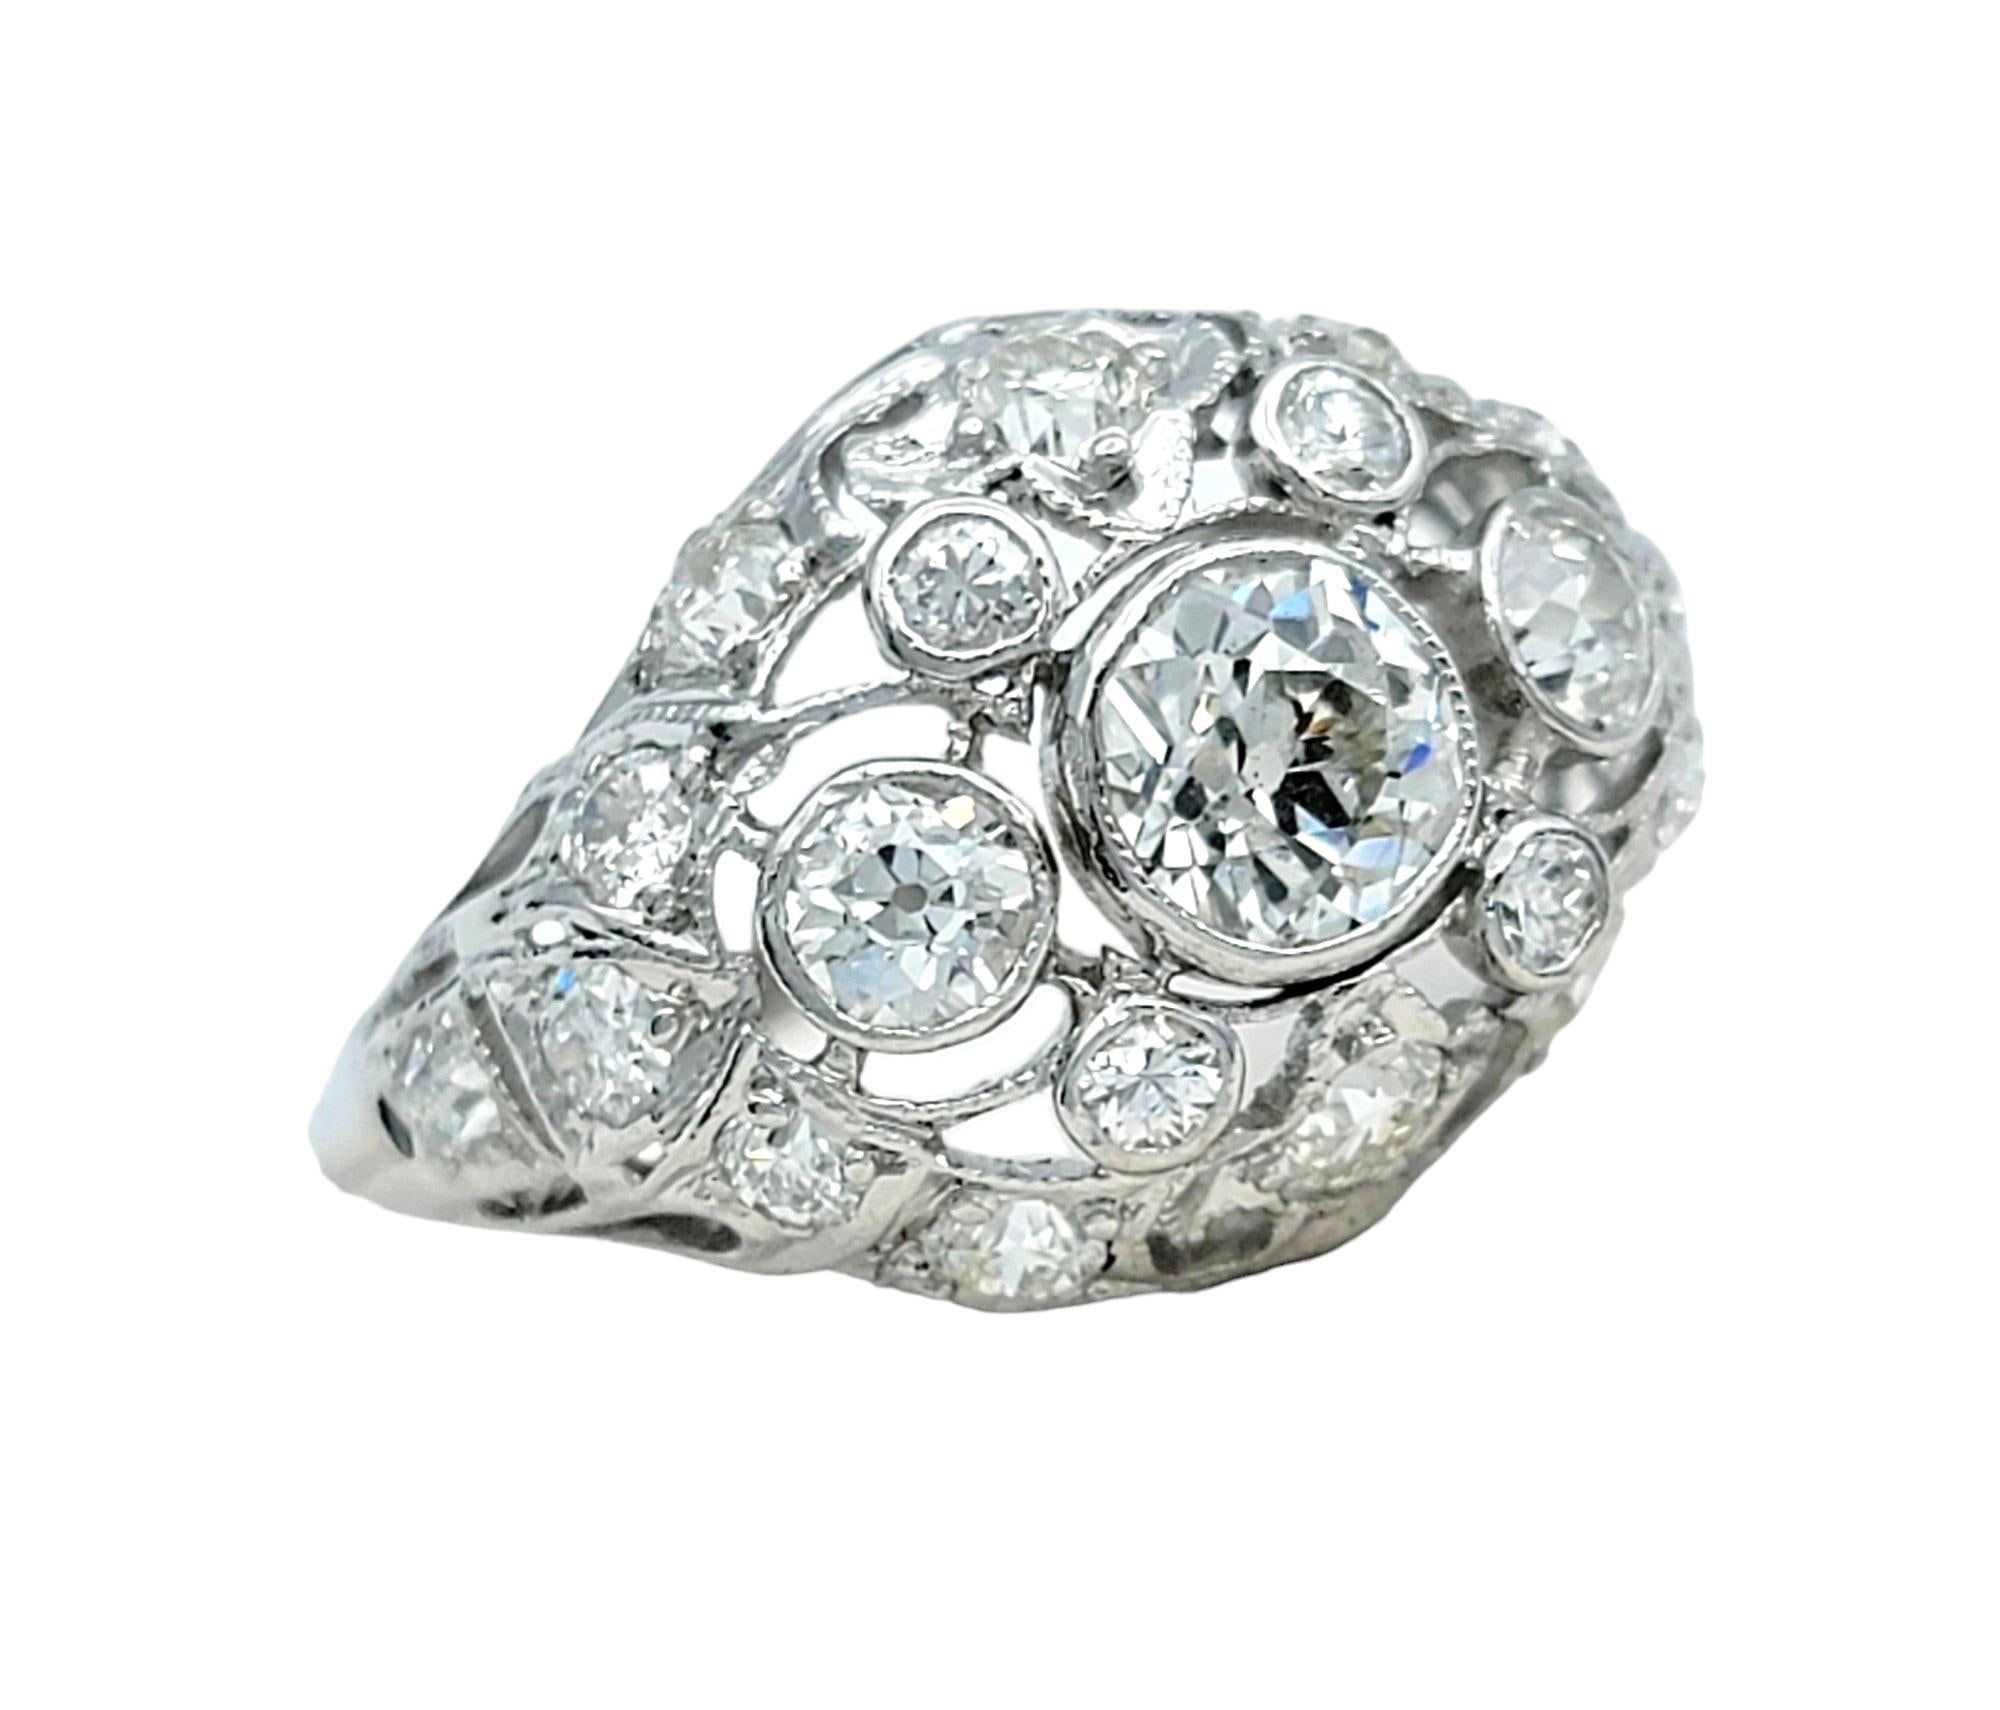 Ring Size: 5

This stunning vintage diamond cluster dome ring, elegantly set in gleaming 14 karat white gold, is a timeless testament to sophistication and style. Its distinctive dome-shaped design features a dazzling array of diamonds meticulously